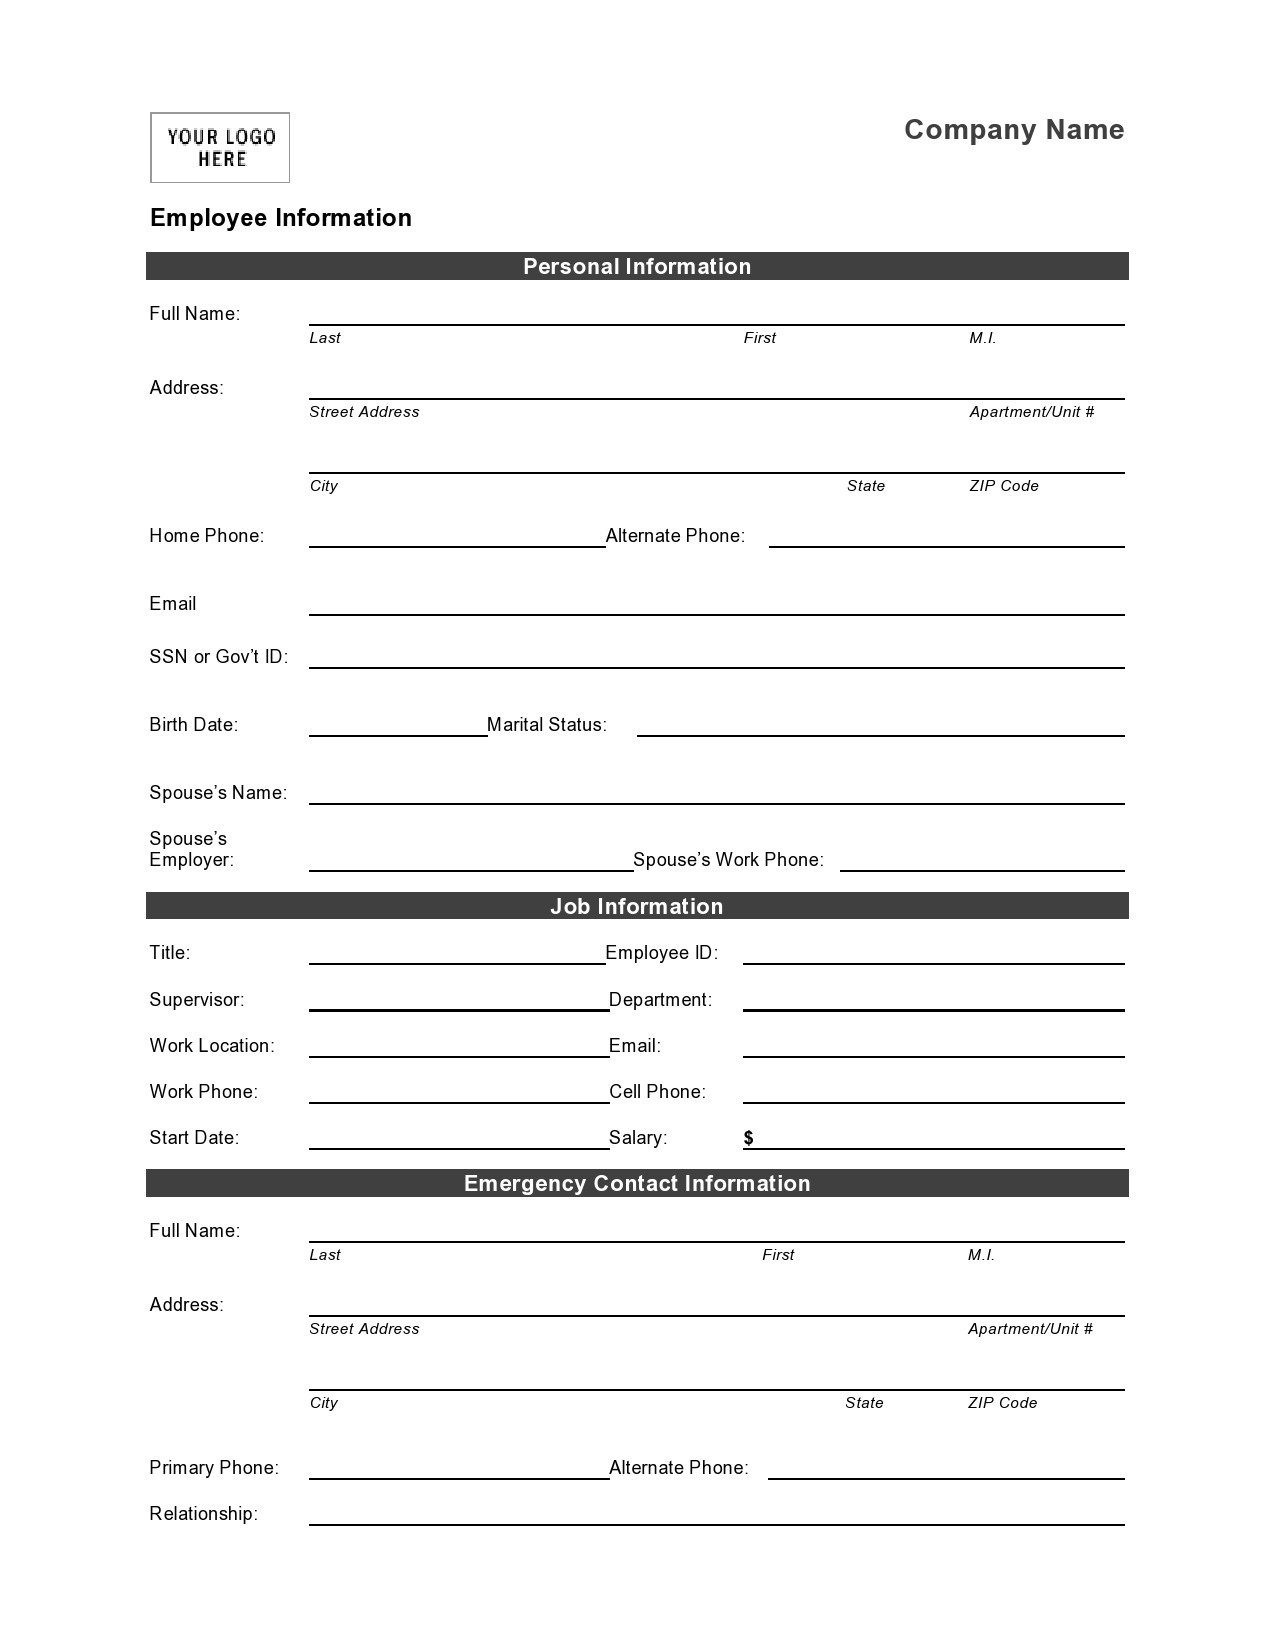 Free personal information form 25